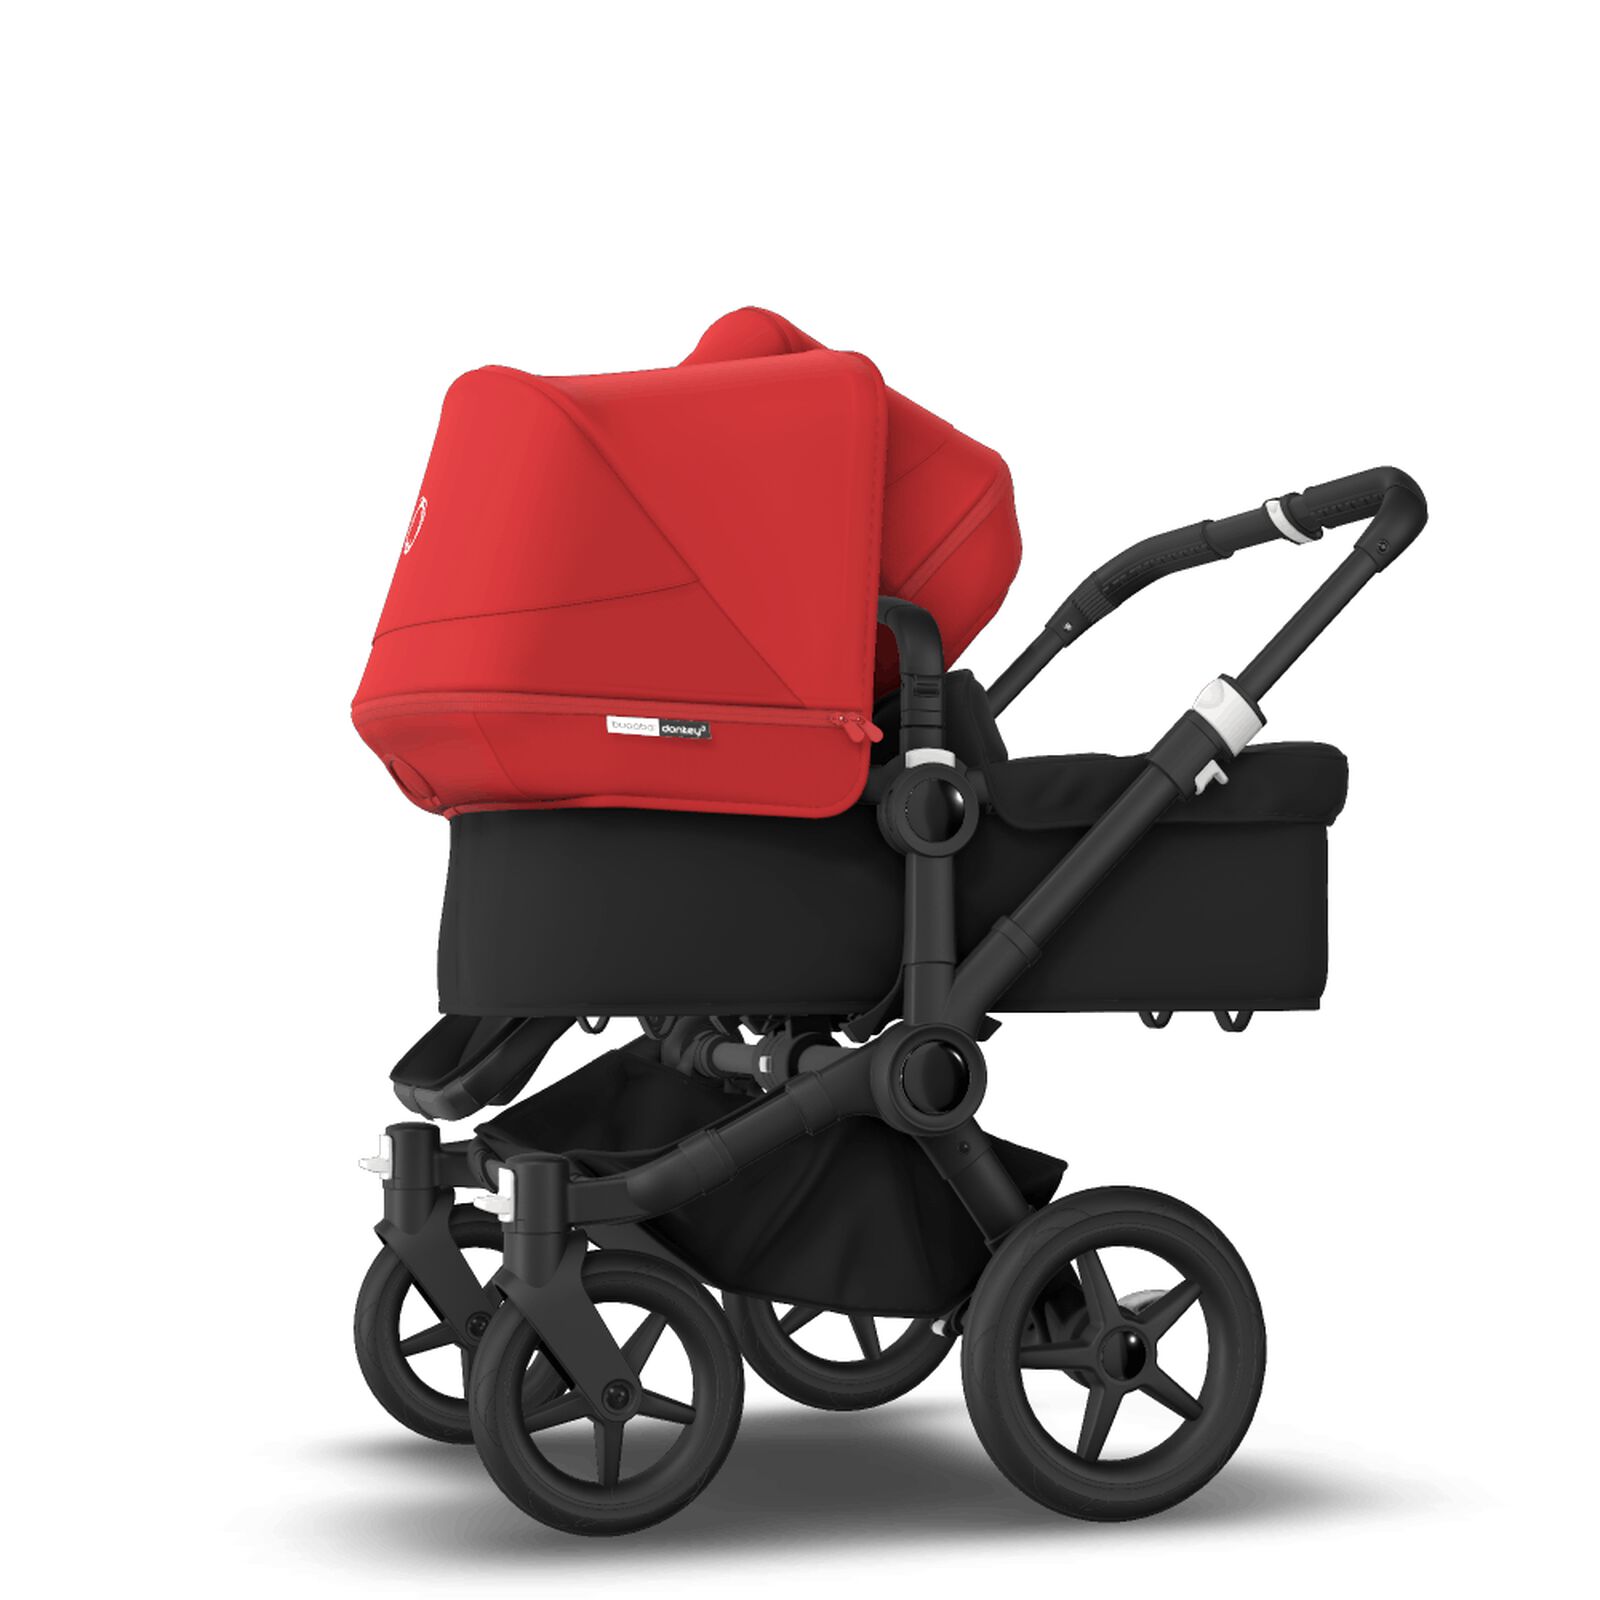 Bugaboo Donkey 3 Duo bassinet and seat stroller - View 2